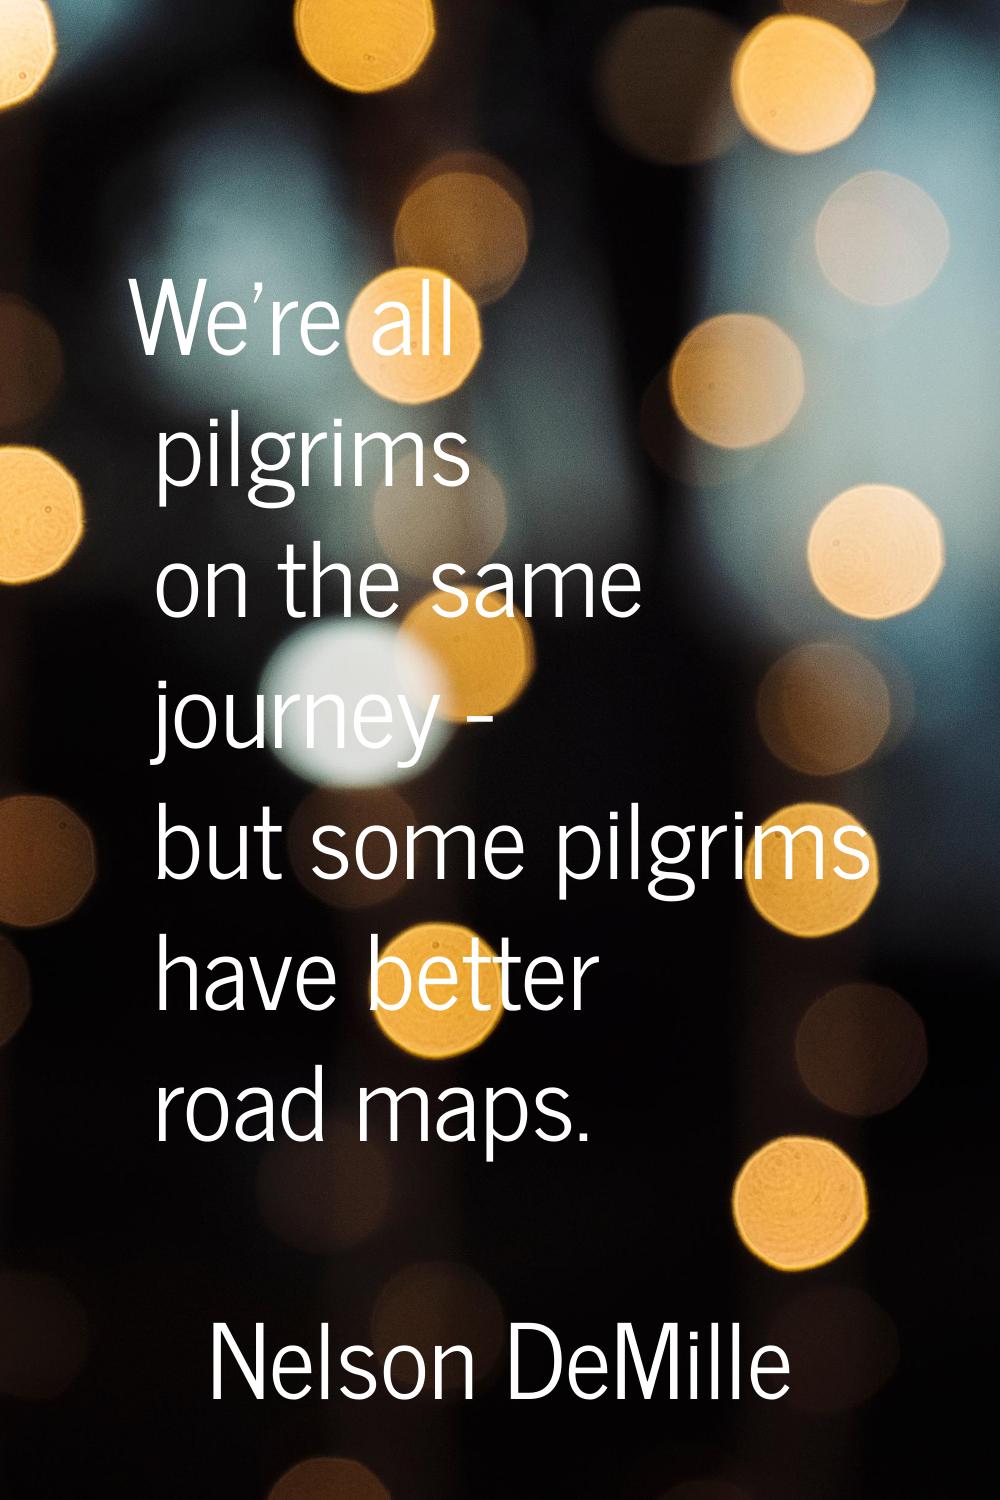 We're all pilgrims on the same journey - but some pilgrims have better road maps.